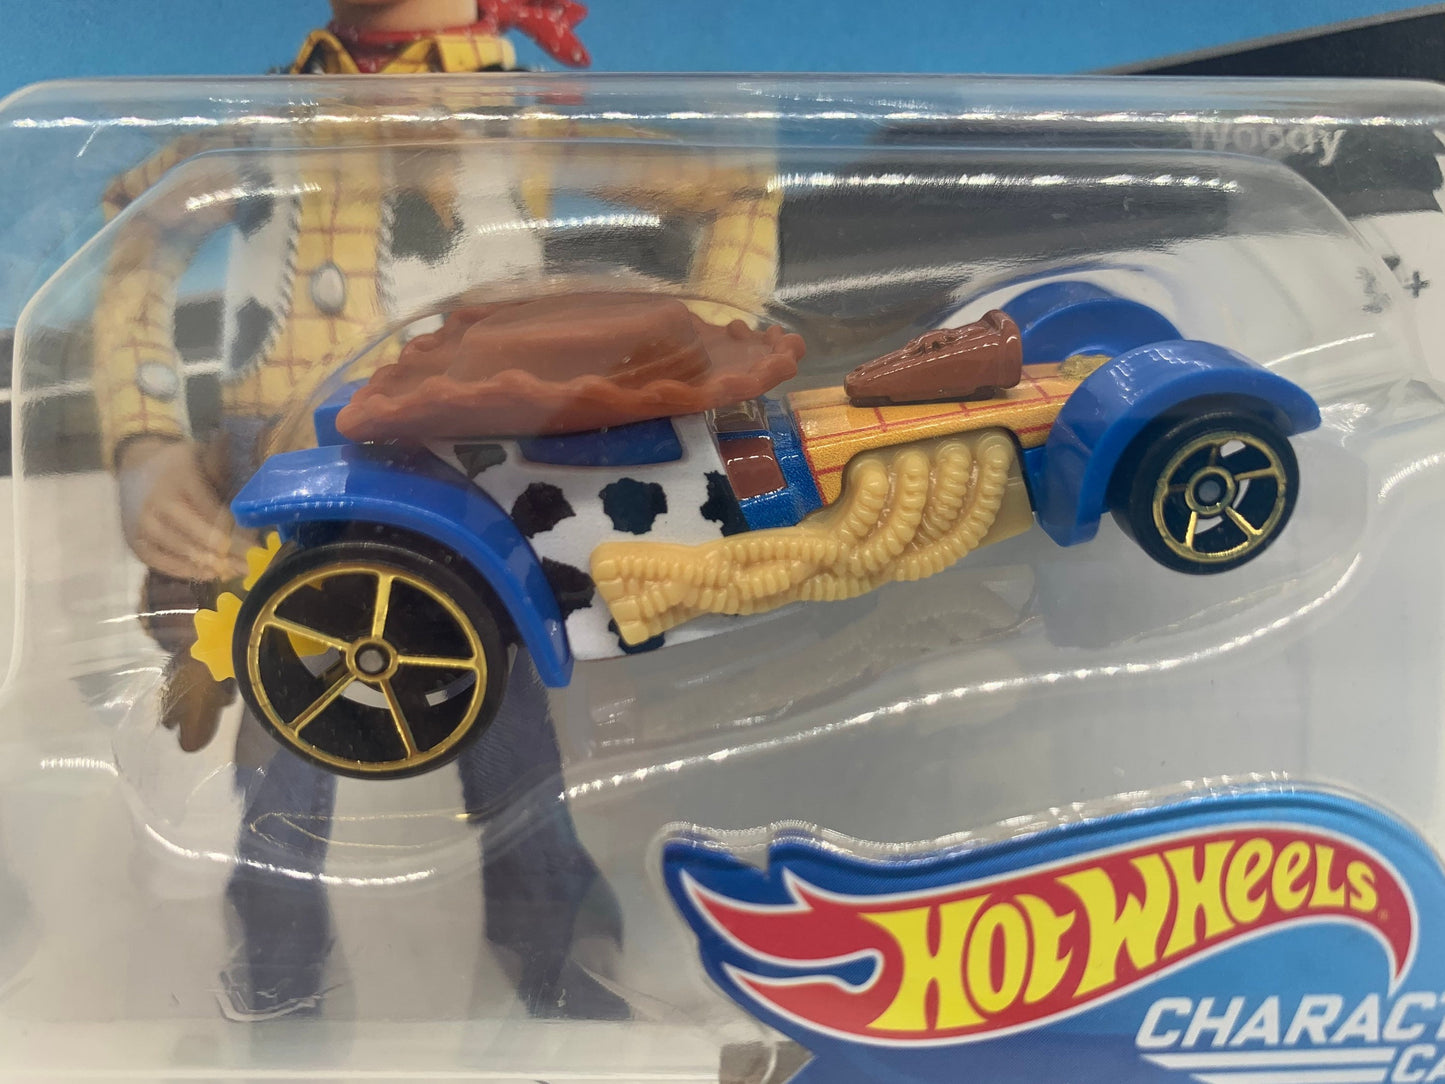 Hot Wheels Sheriff Woody Toy Story Blue Disney Character Cars Perfect Birthday Gift Miniature Collectable Model Toy Car